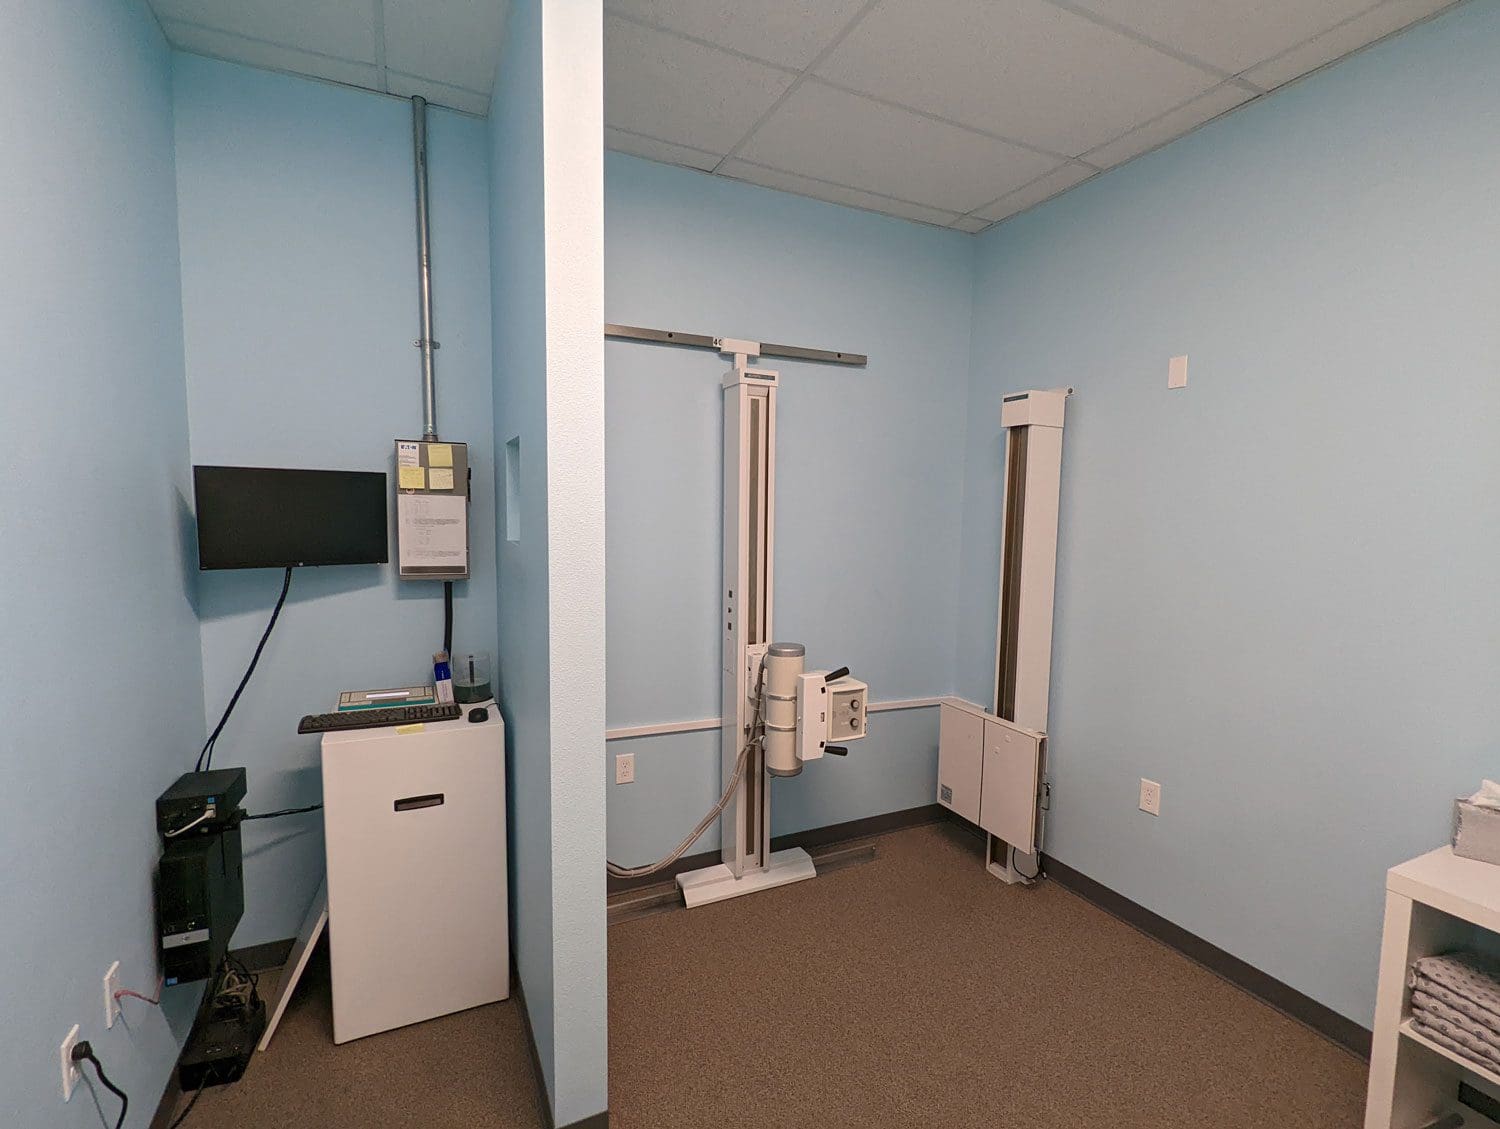 Vancouver Chiropractic X-ray room.